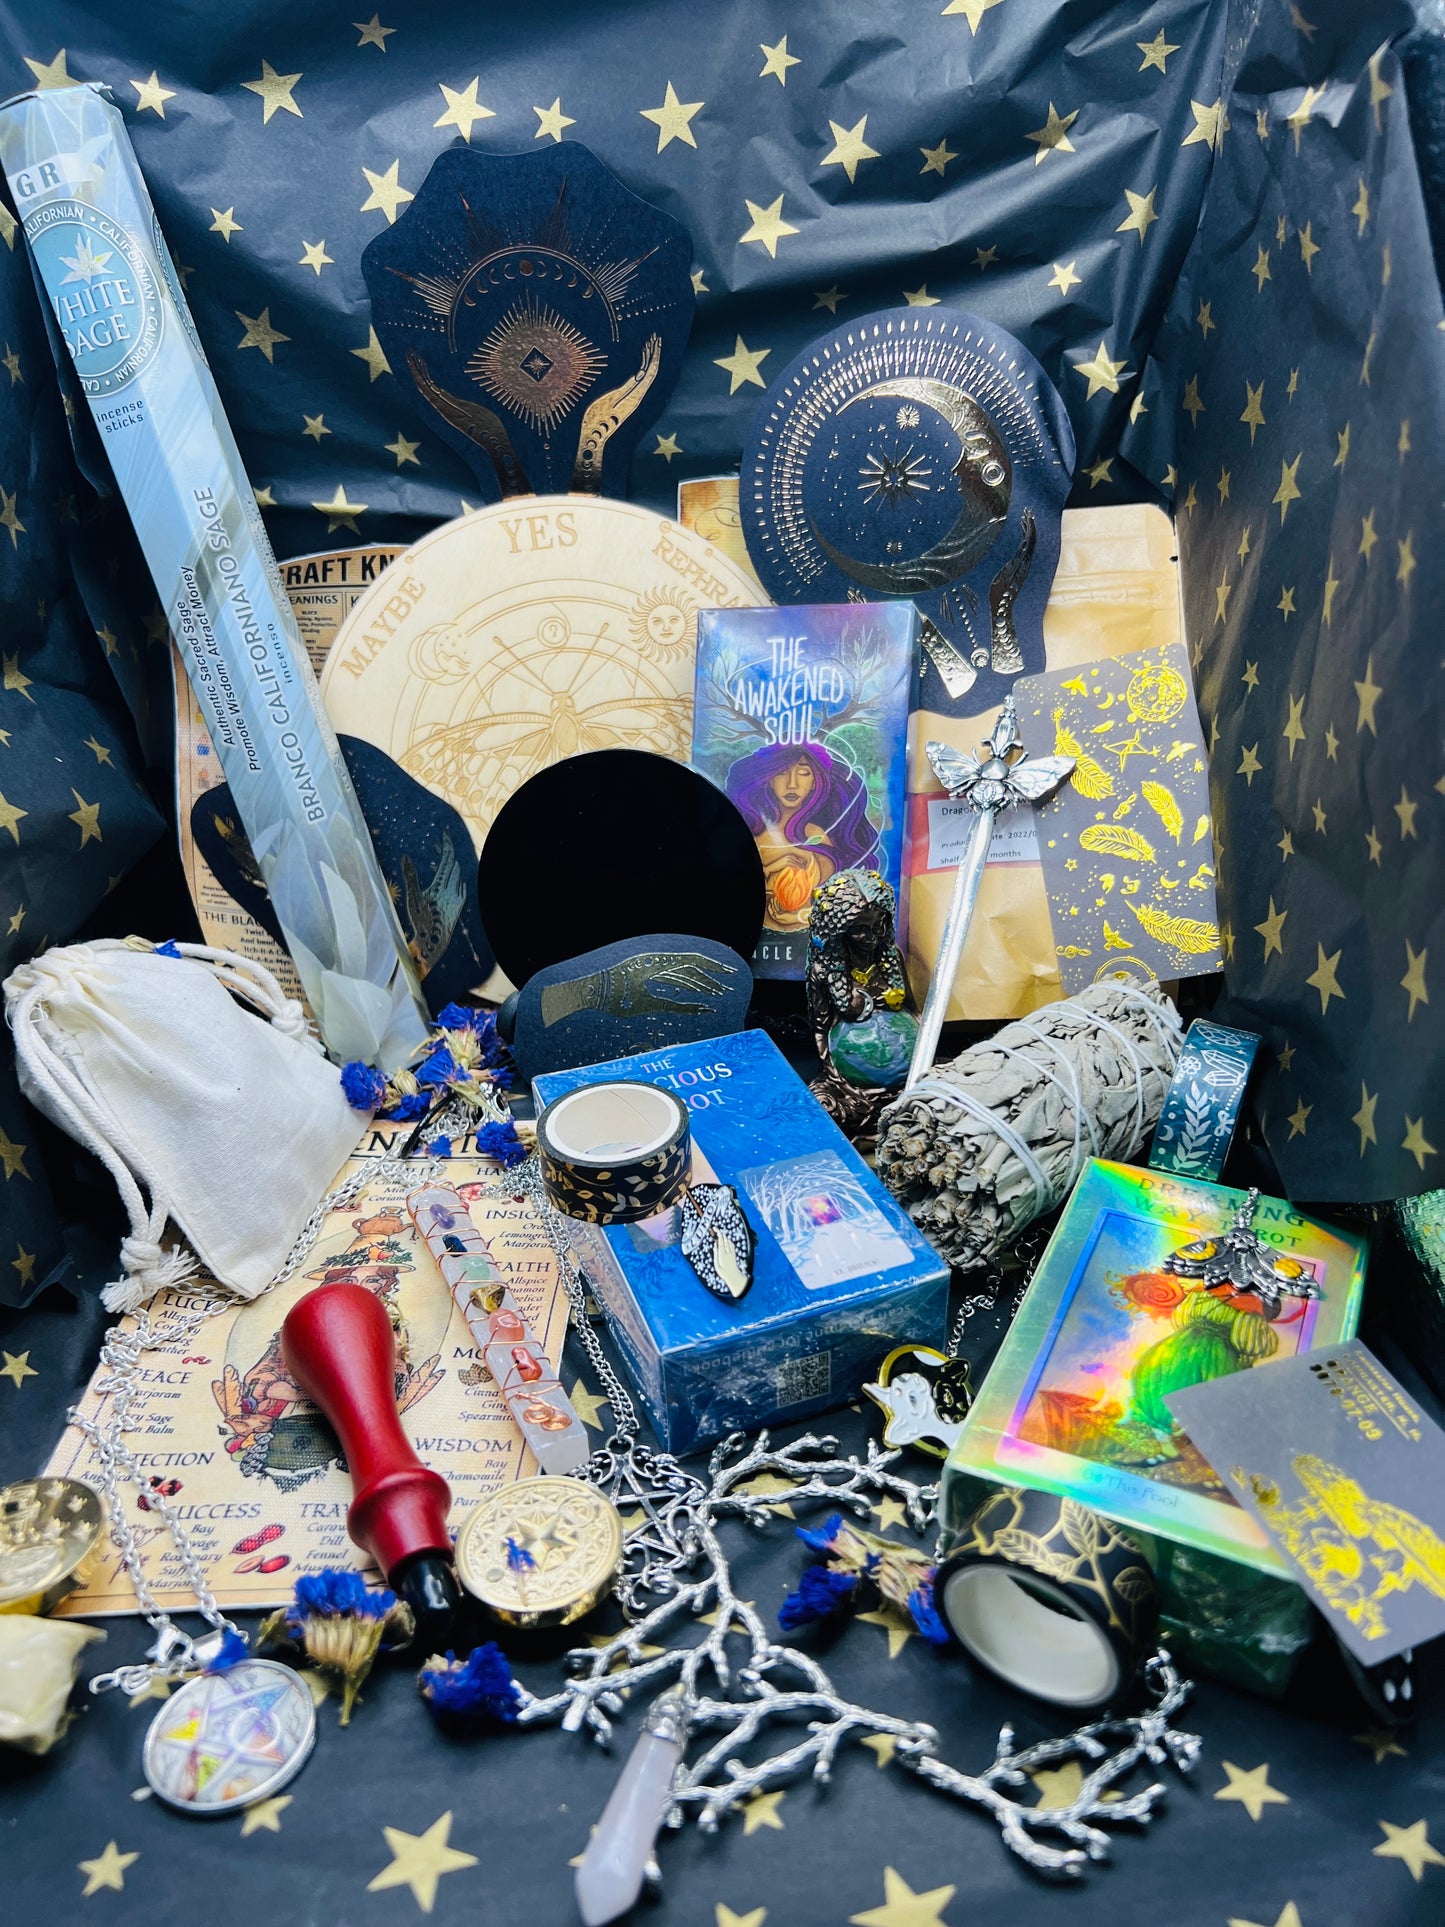 Enchanting Mystery Witchcraft Box Kit - Perfect for Beginner Witches and Intermediate Magick-Makers